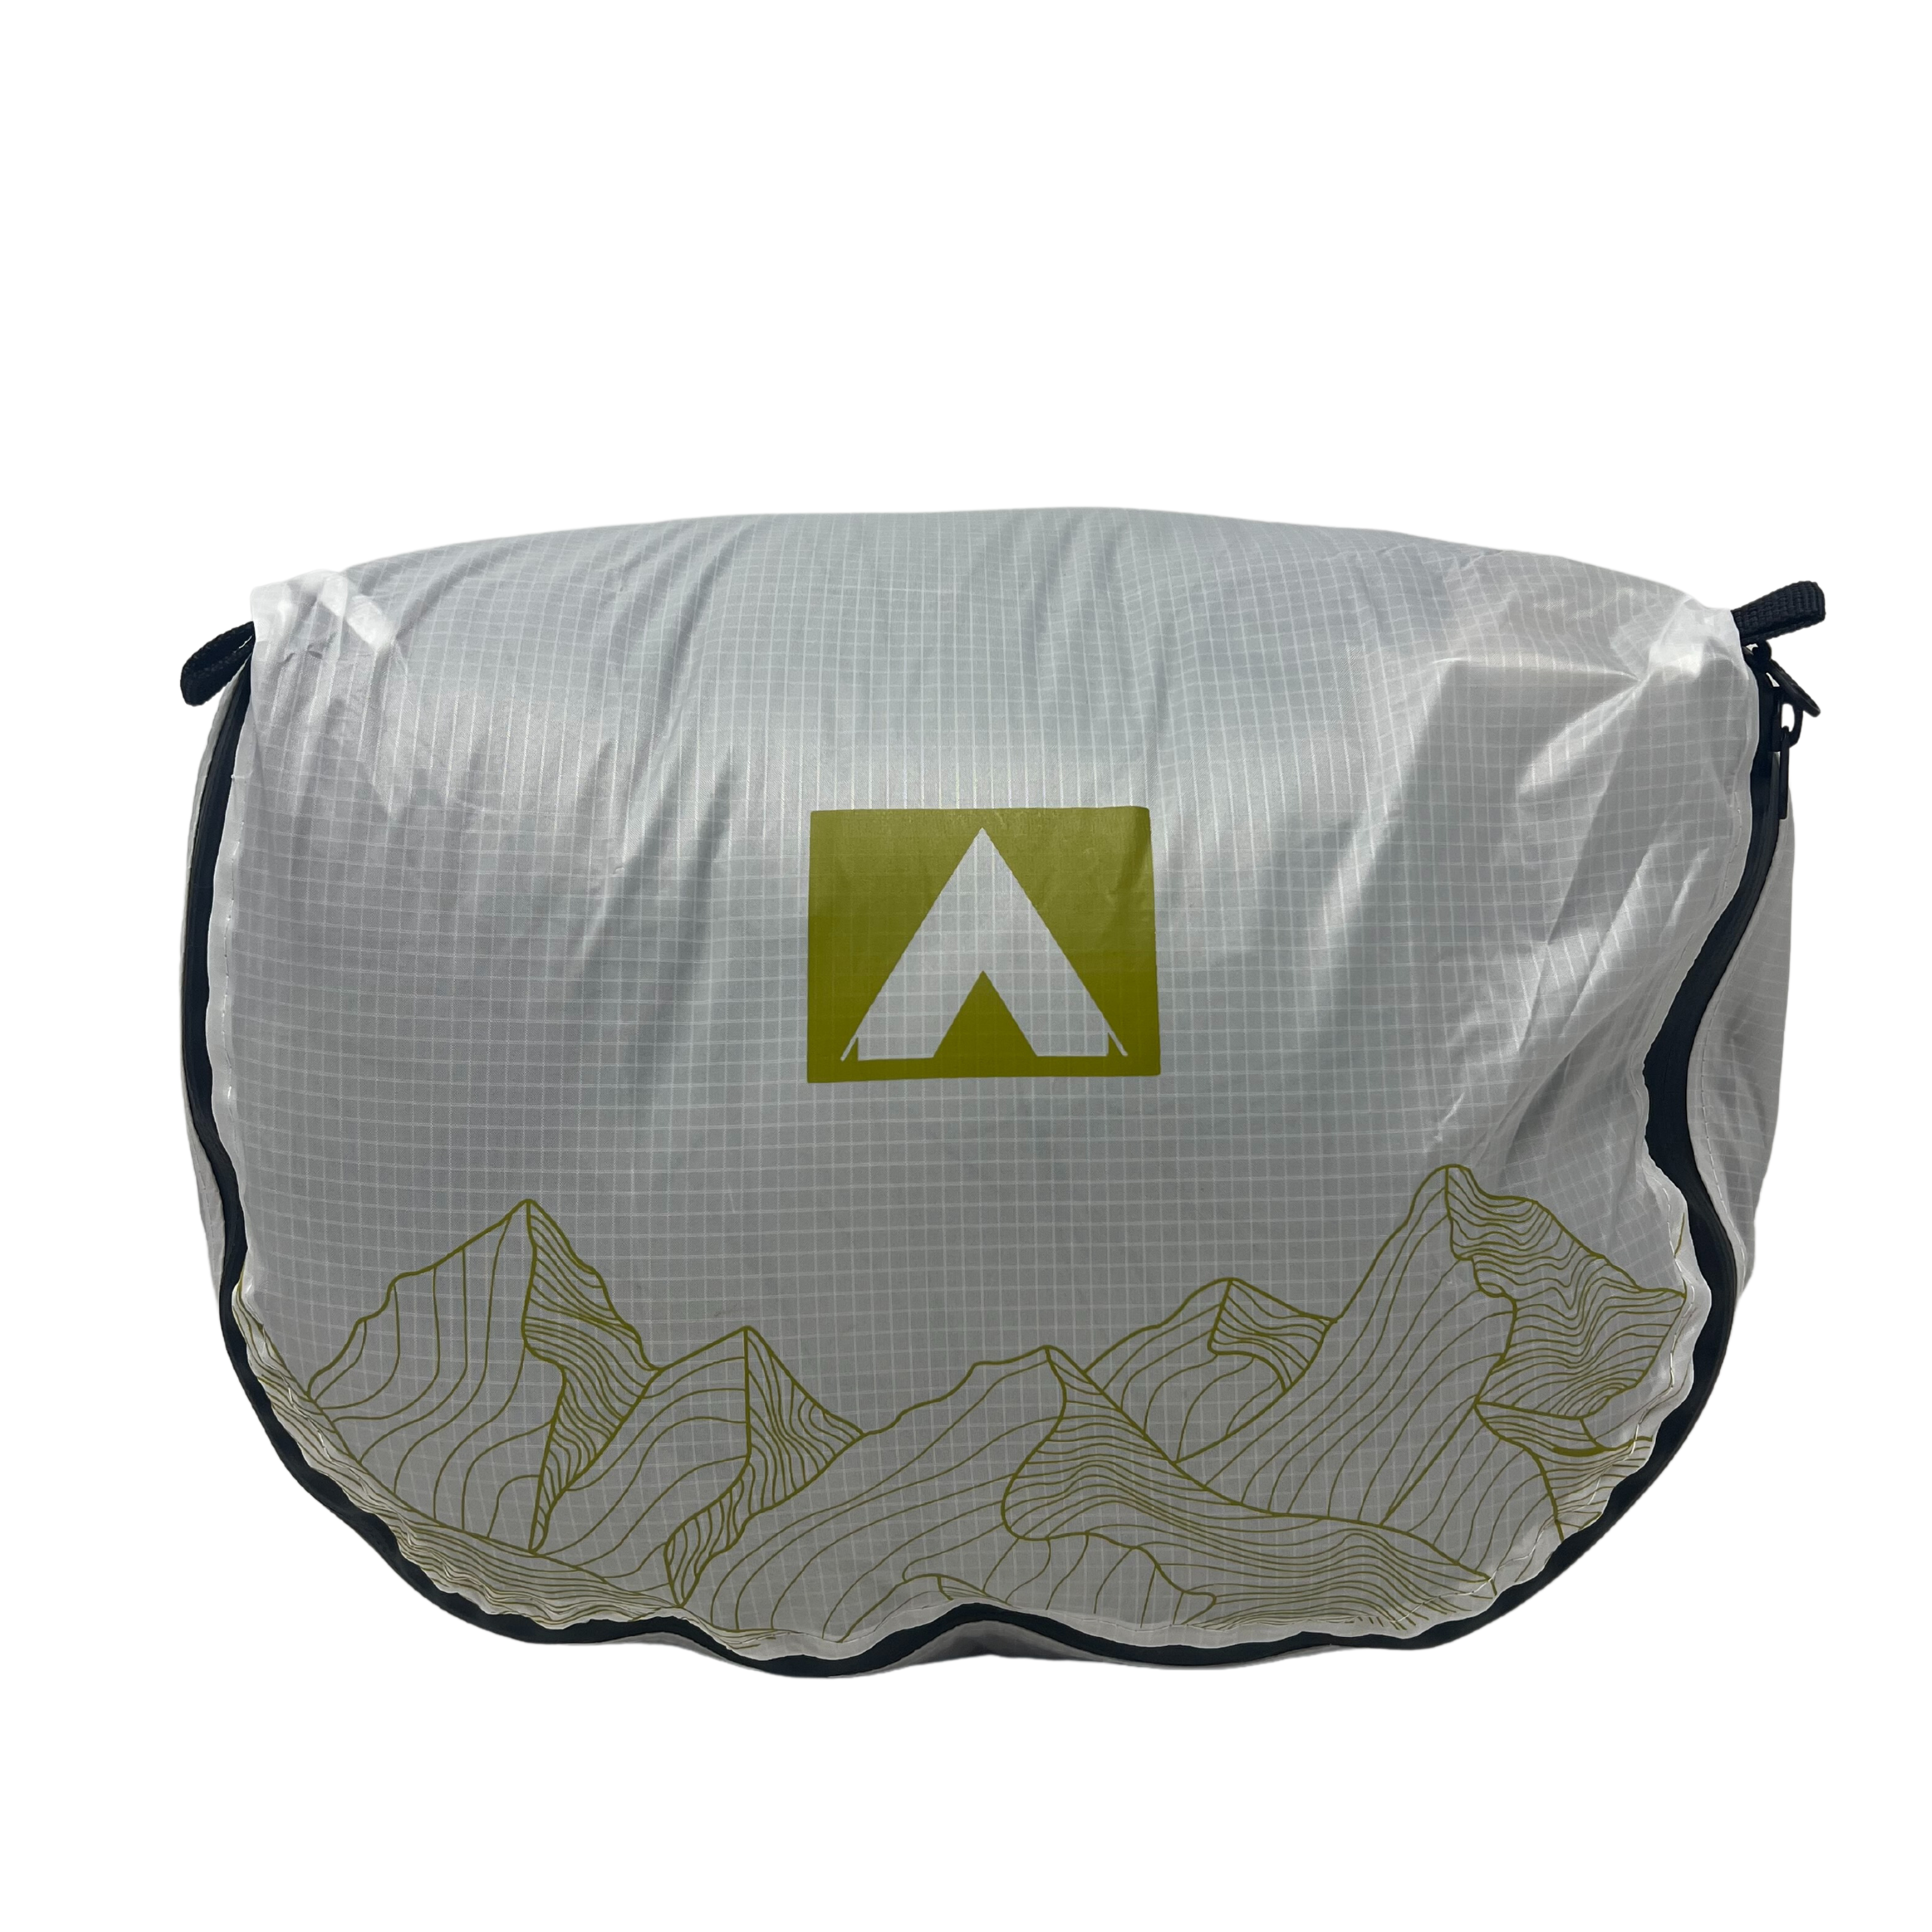 Geartrade - Ultralight Sil Compression Bags